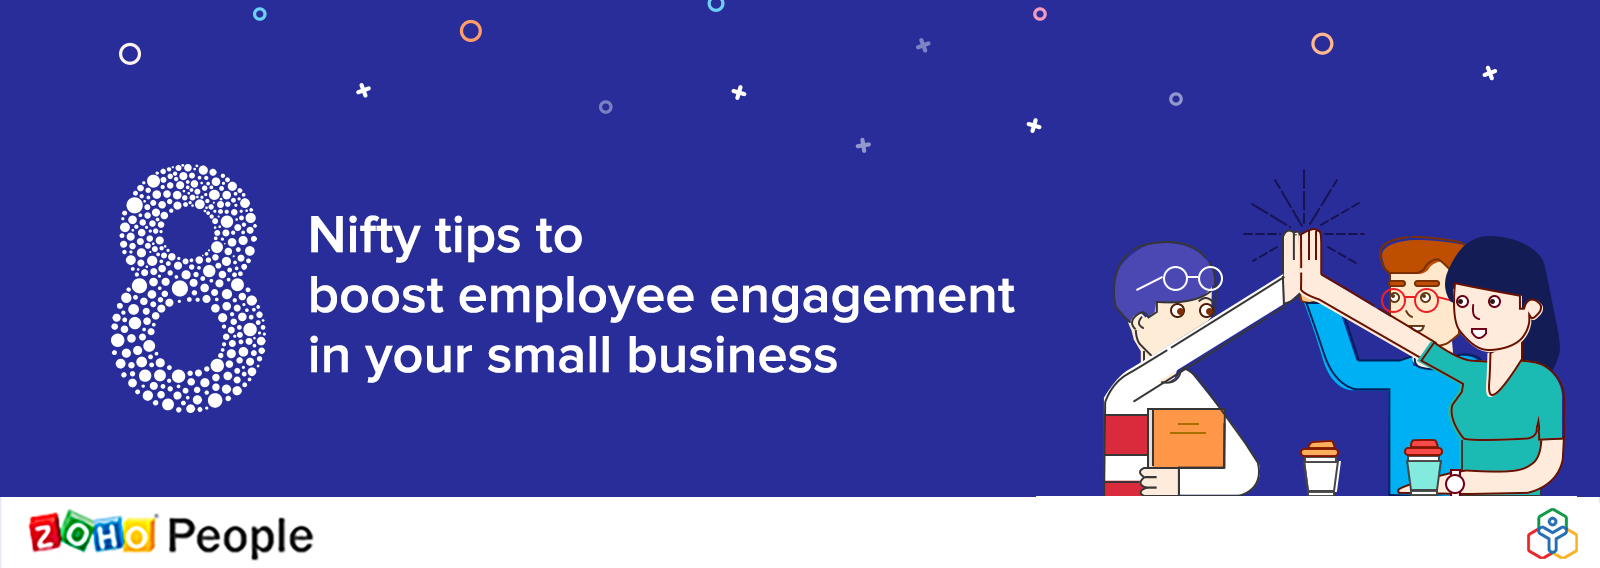 Go the extra mile: 8 nifty tips to boost employee engagement in your small business